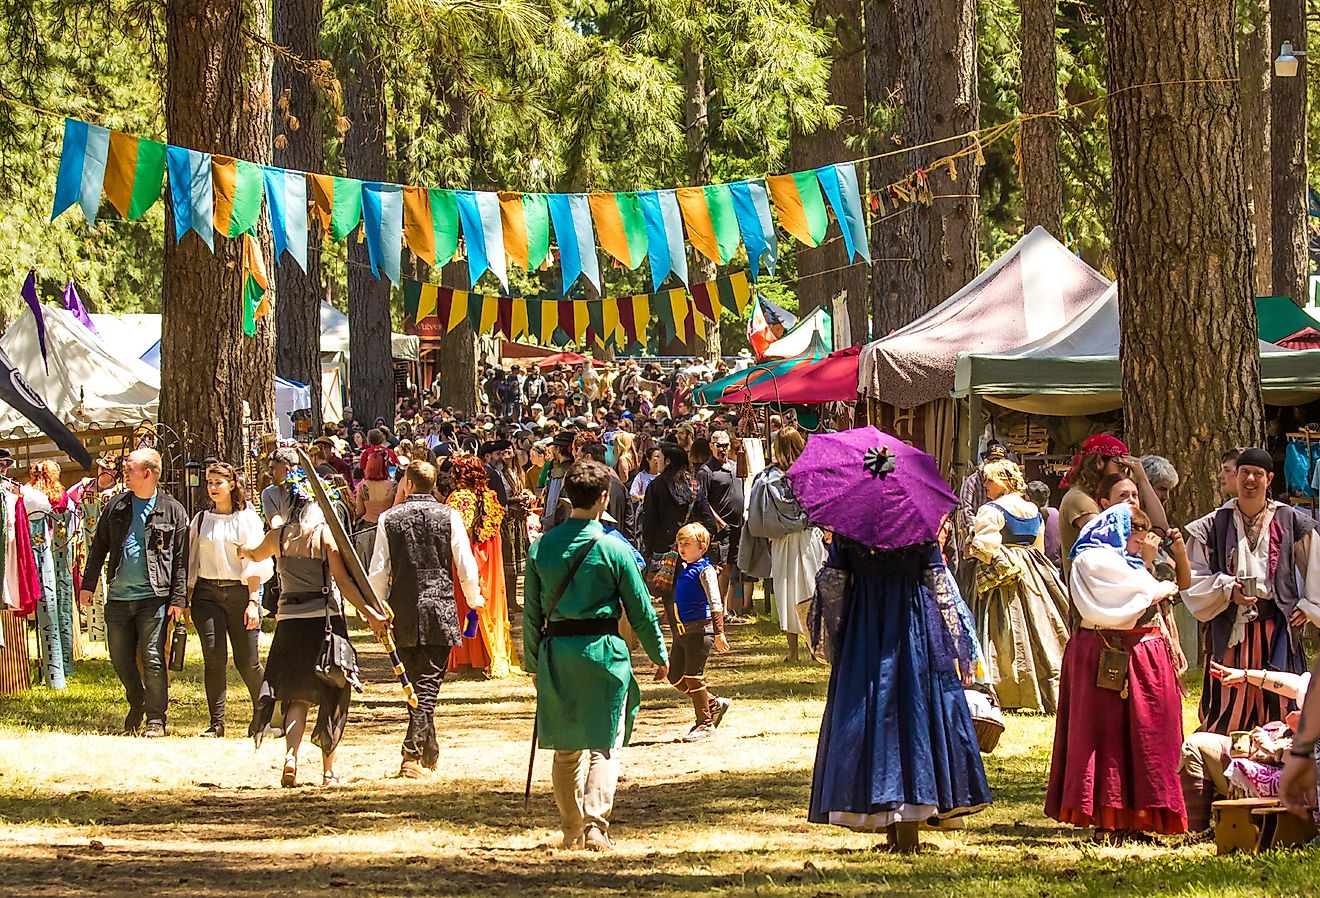 The crowd of people, many dressed in period clothing, at the Oregon Renaissance fair in Canby, Oregon. Image credit Bob Pool via Shutterstock